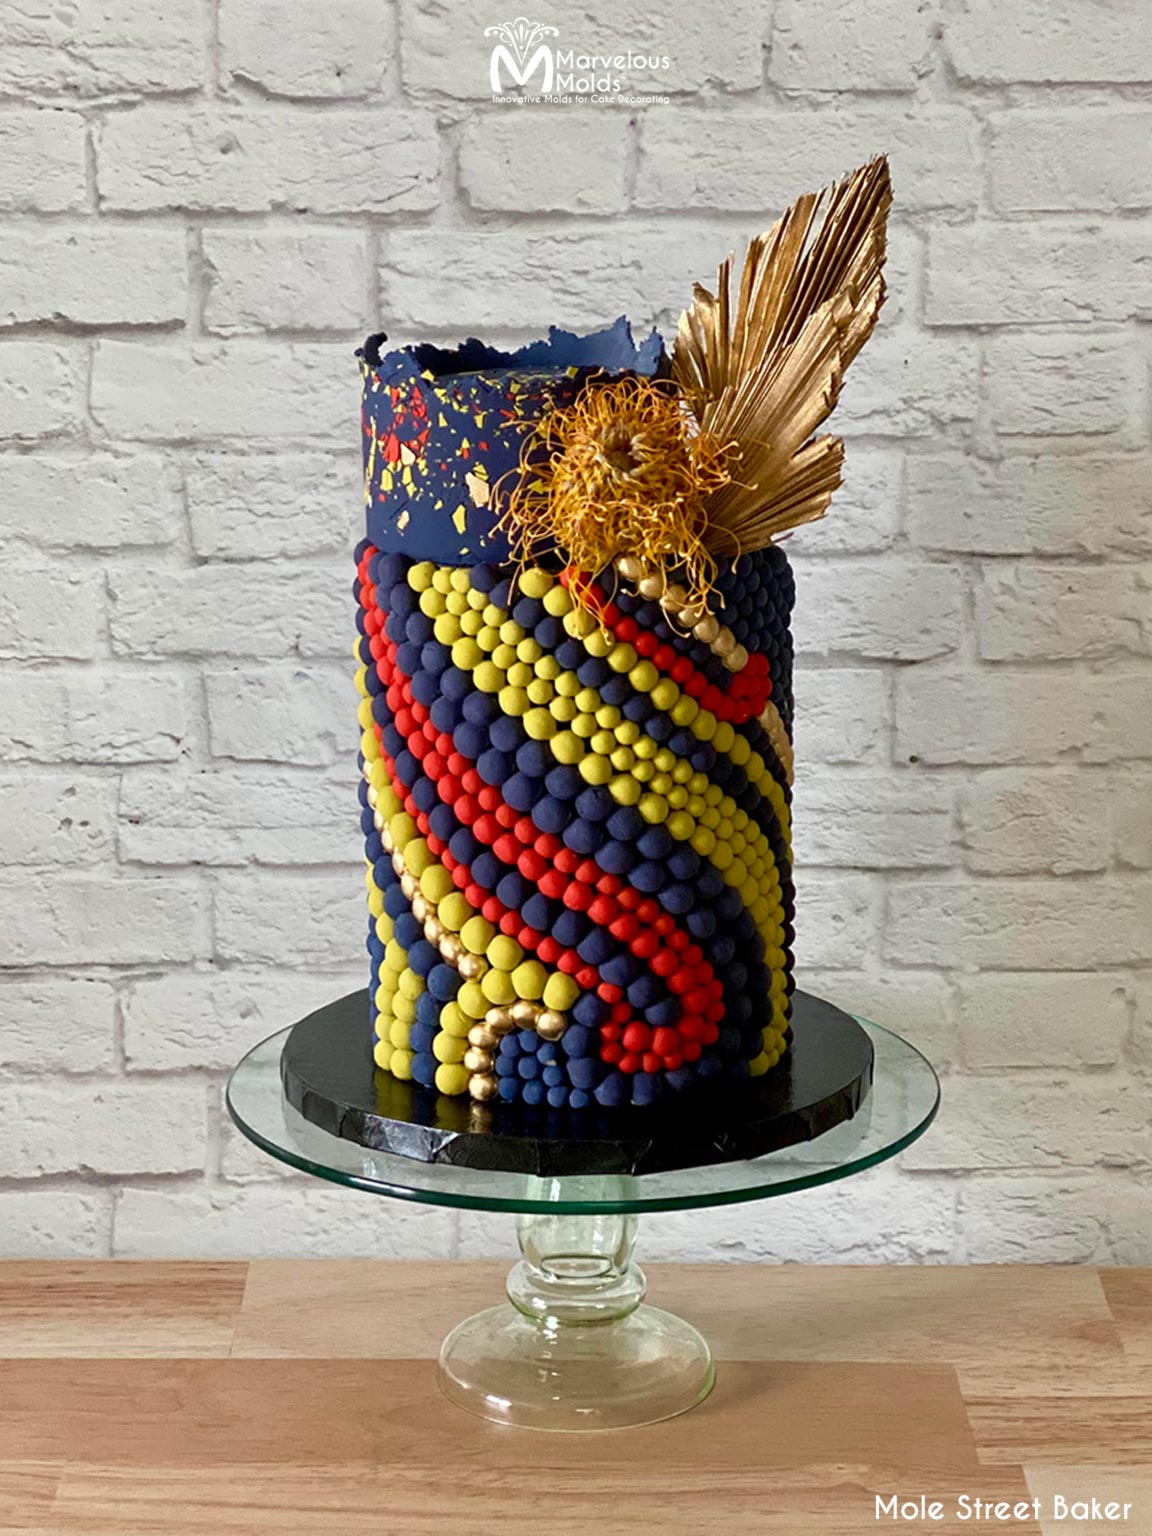 Red Yellow Blue Cake Decorated with Full Pearl Strings, Created Using the Marvelous Molds PinchPro Pearls 10mm Silicone Mold